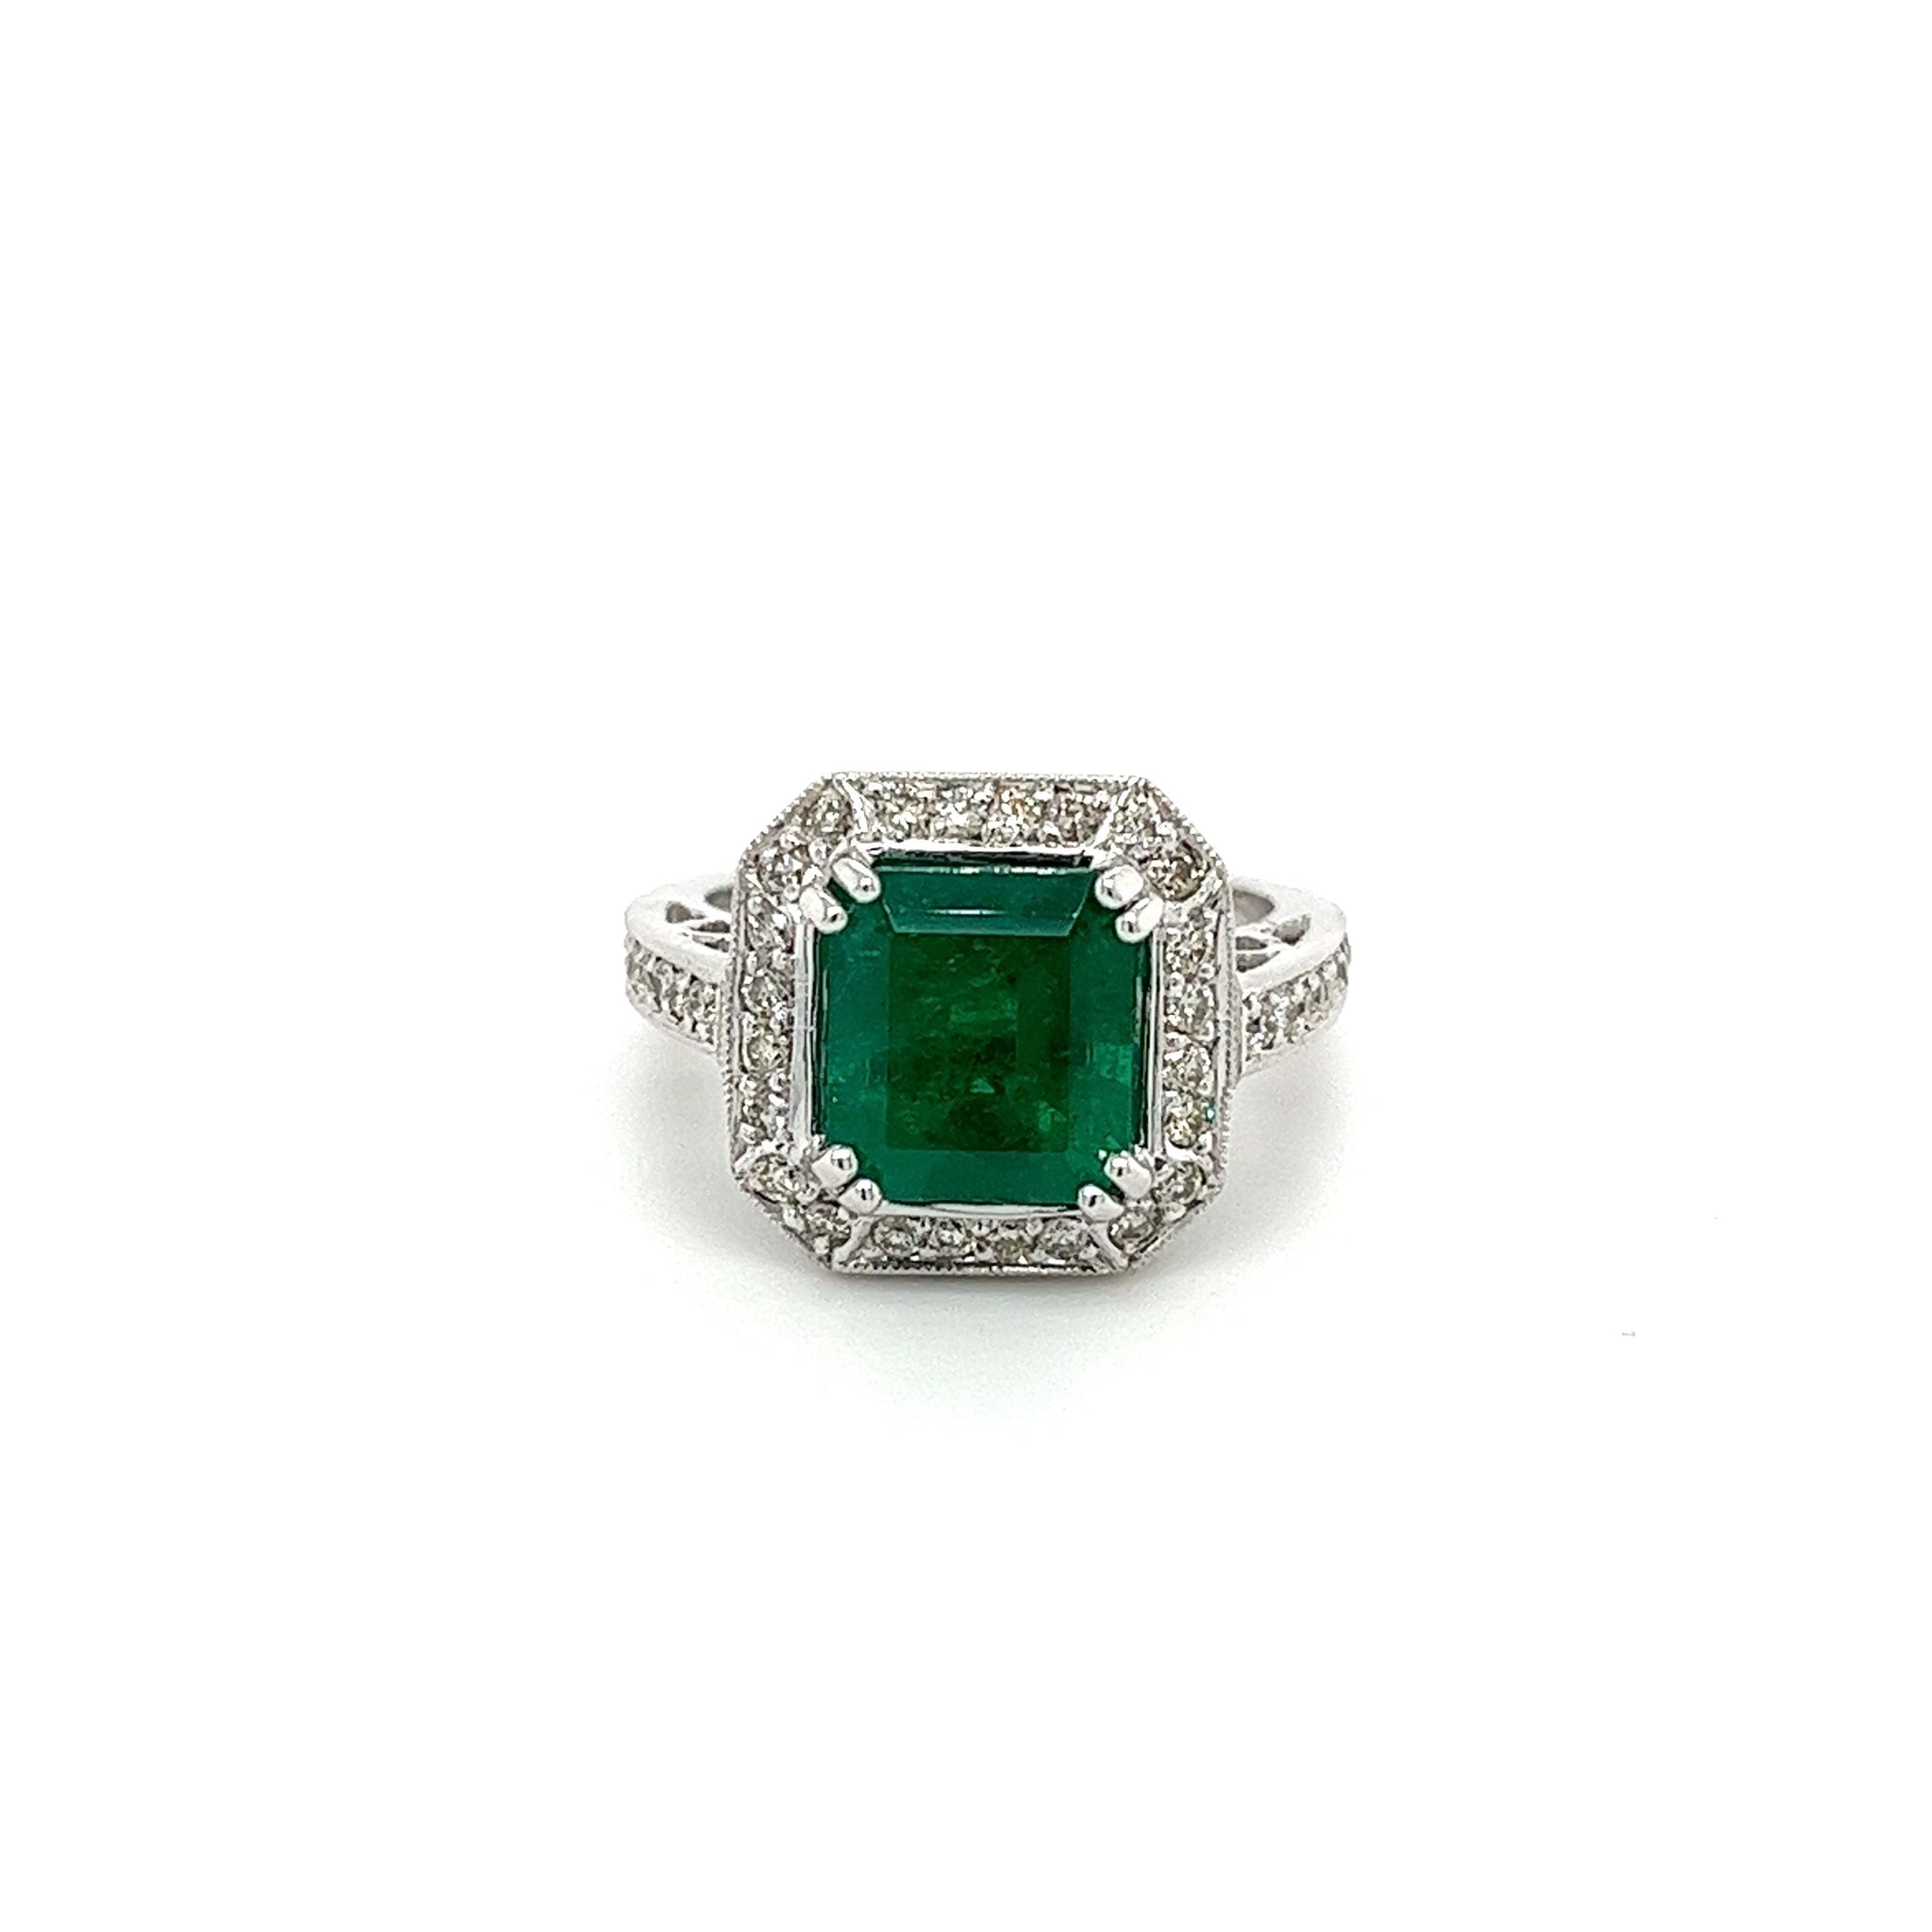 3 Carat Colombian Emerald in 18K White Gold Ring & Round Cut Diamond Halo-Emerald Ring-ASSAY